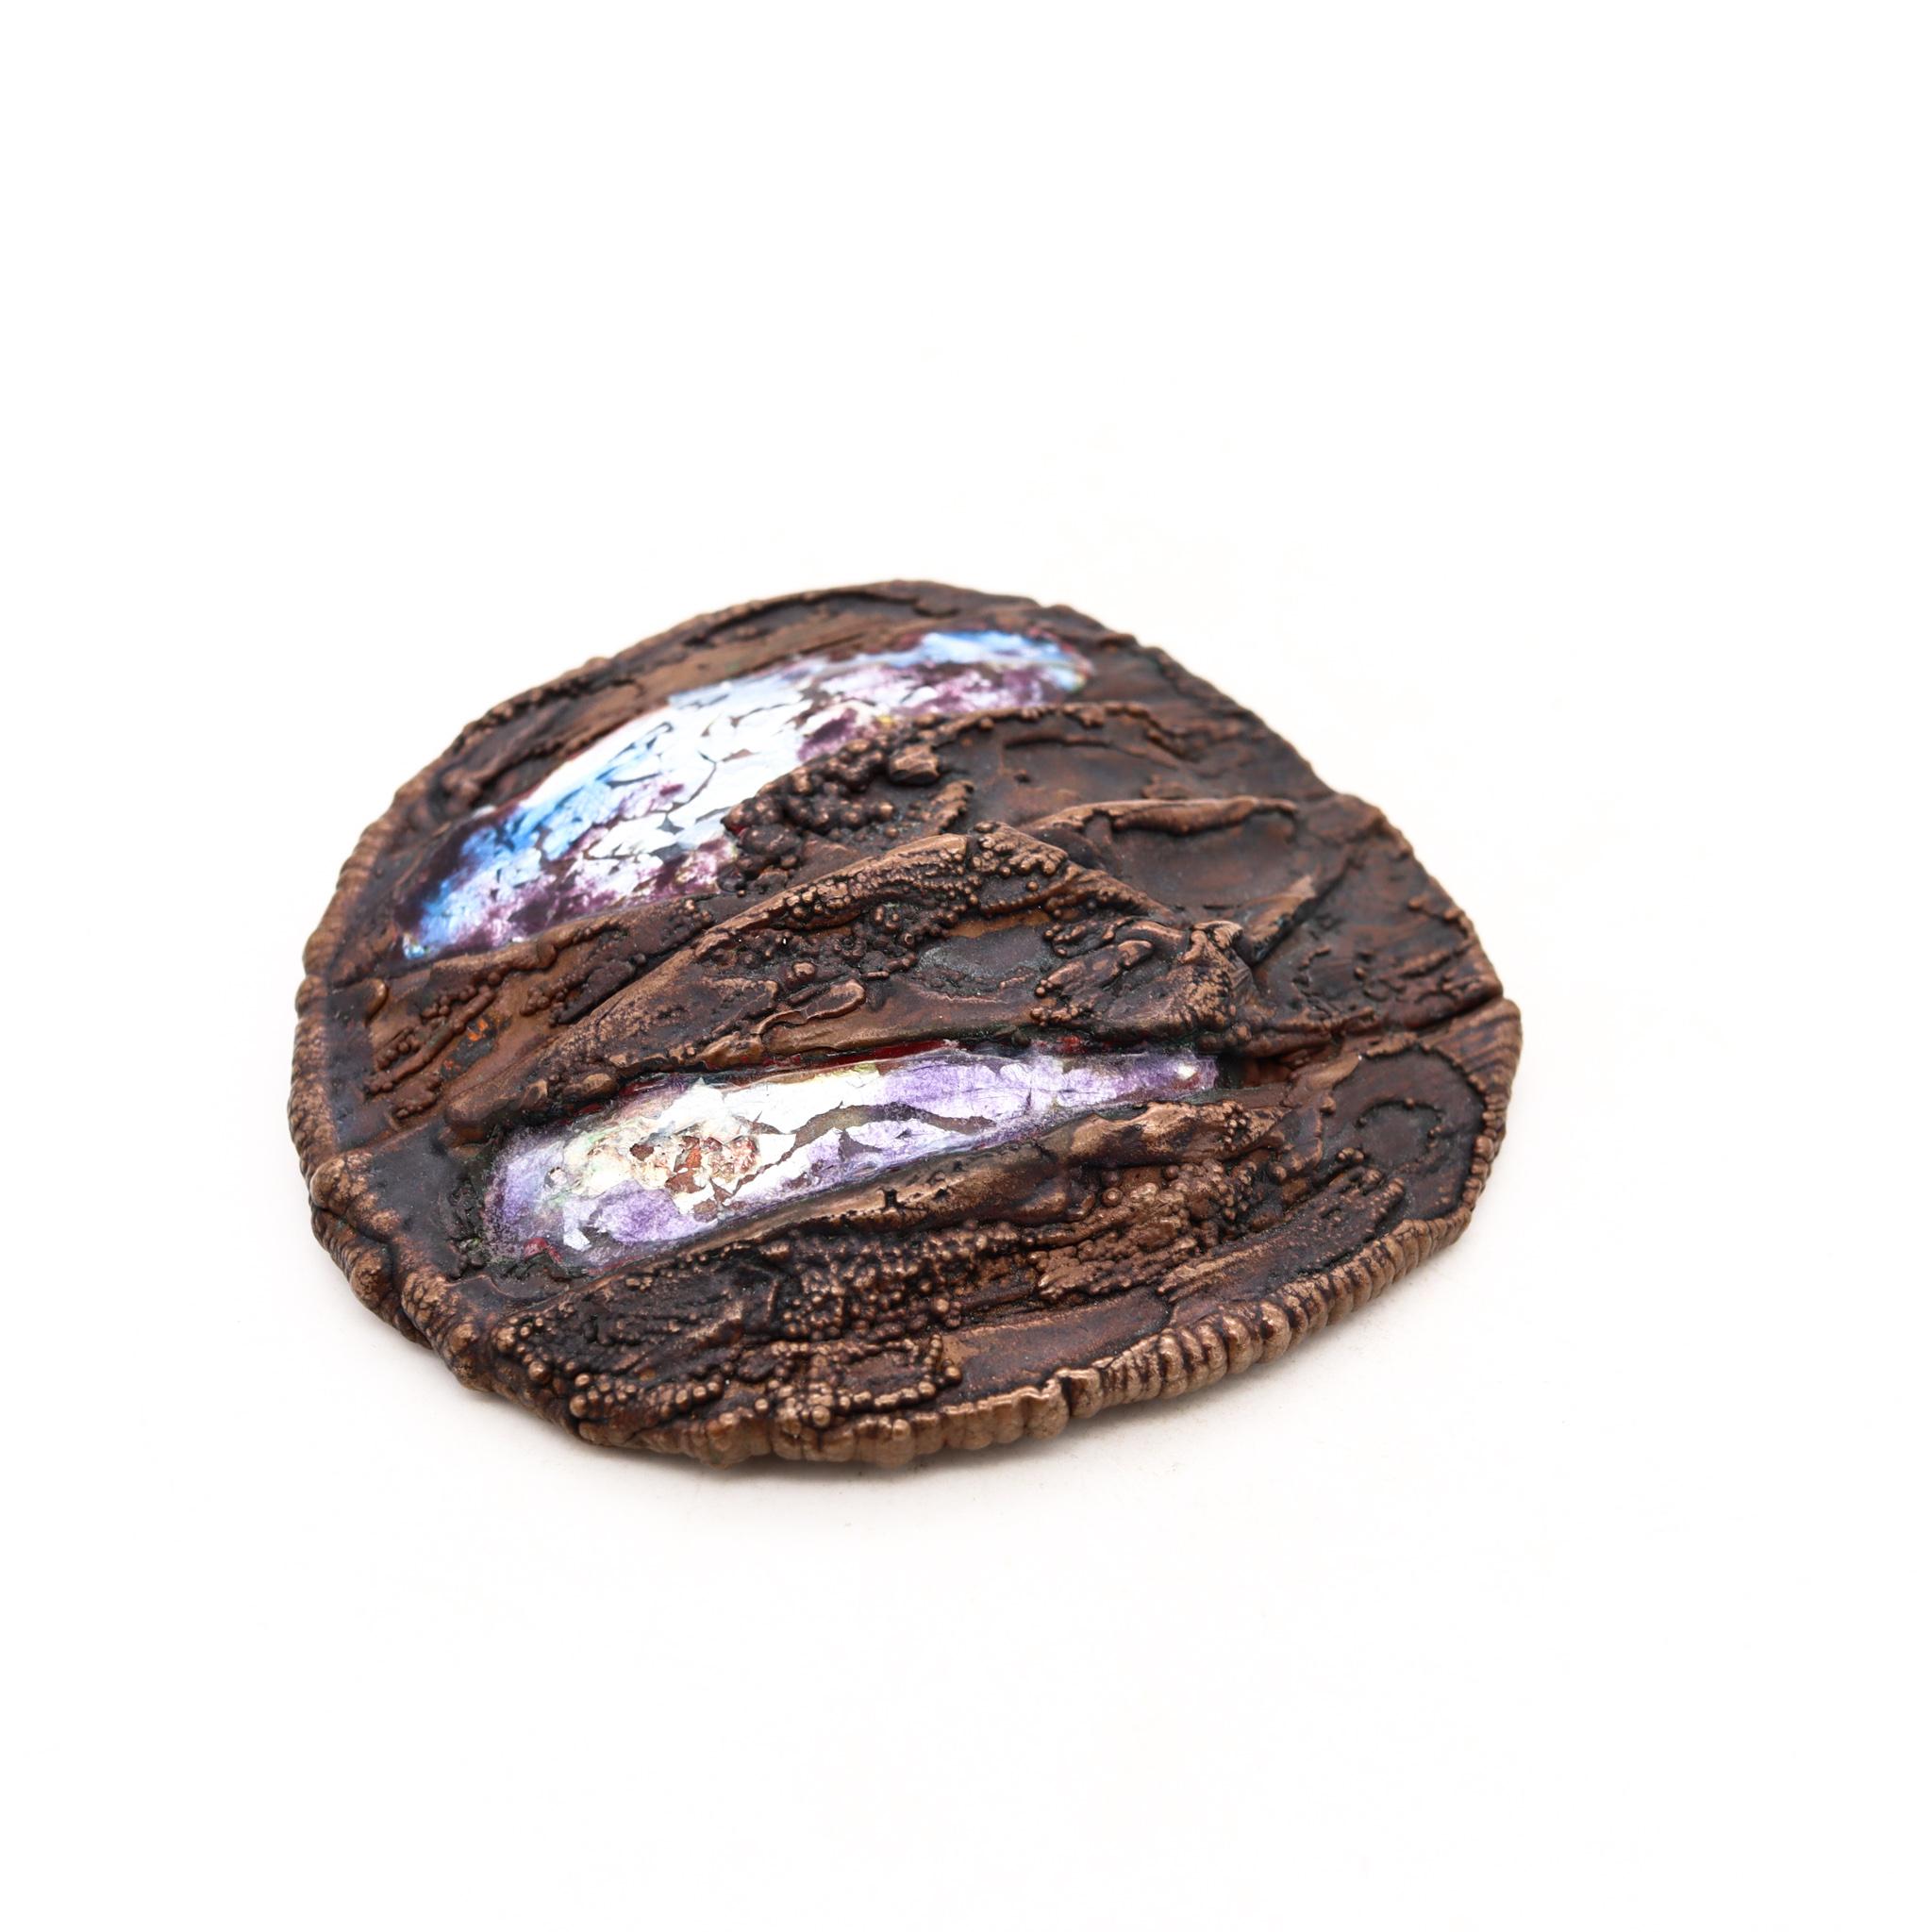 Retro Scandinavian Brutalism 1960 Midcentury Pendant Buckle in Pure Copper with Color For Sale